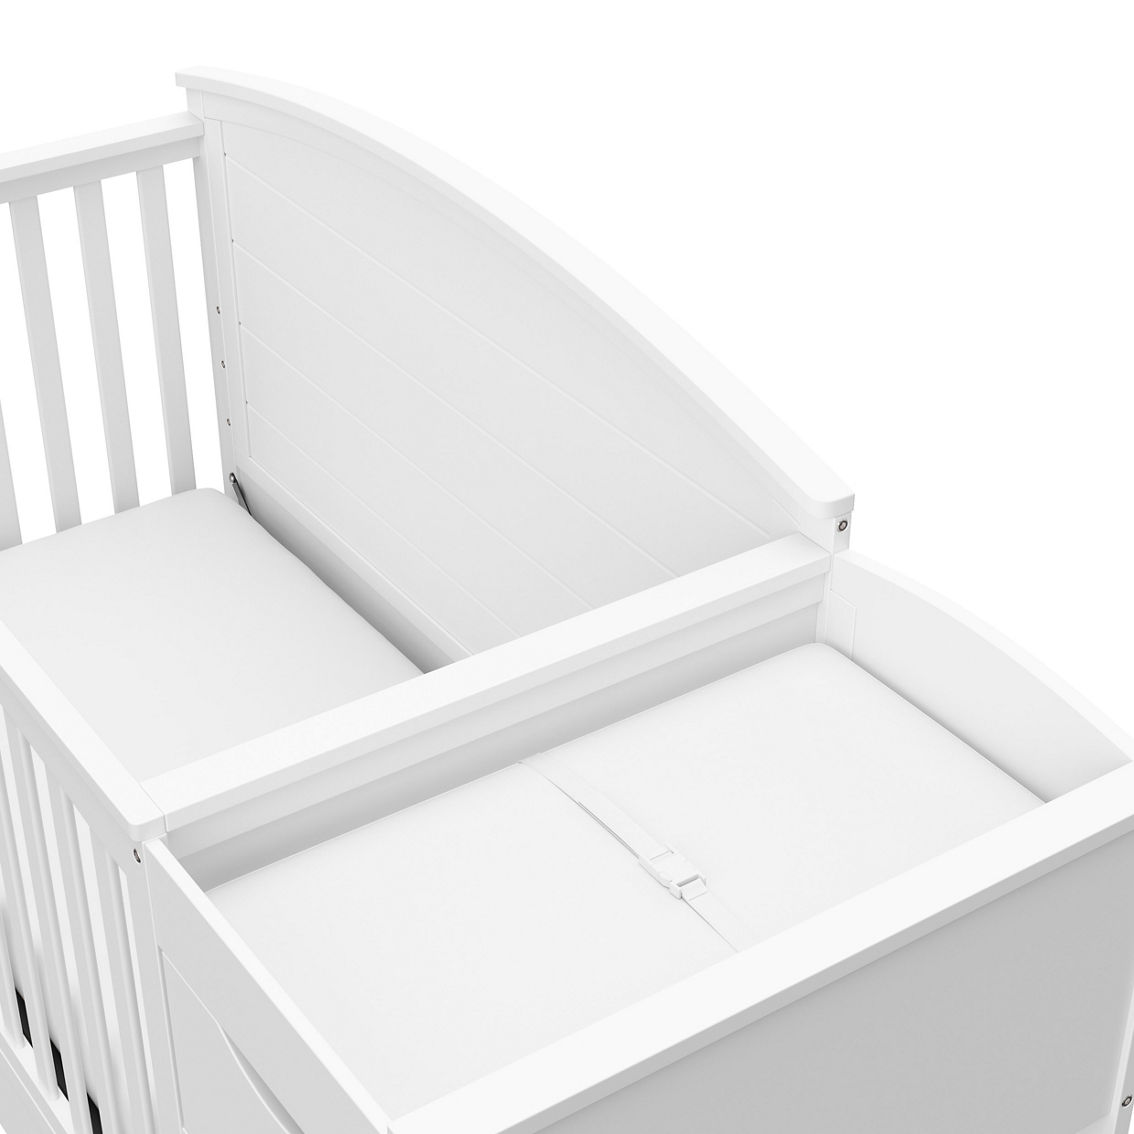 Graco Bellwood 5-in-1 Convertible Crib and Changer - Image 10 of 10